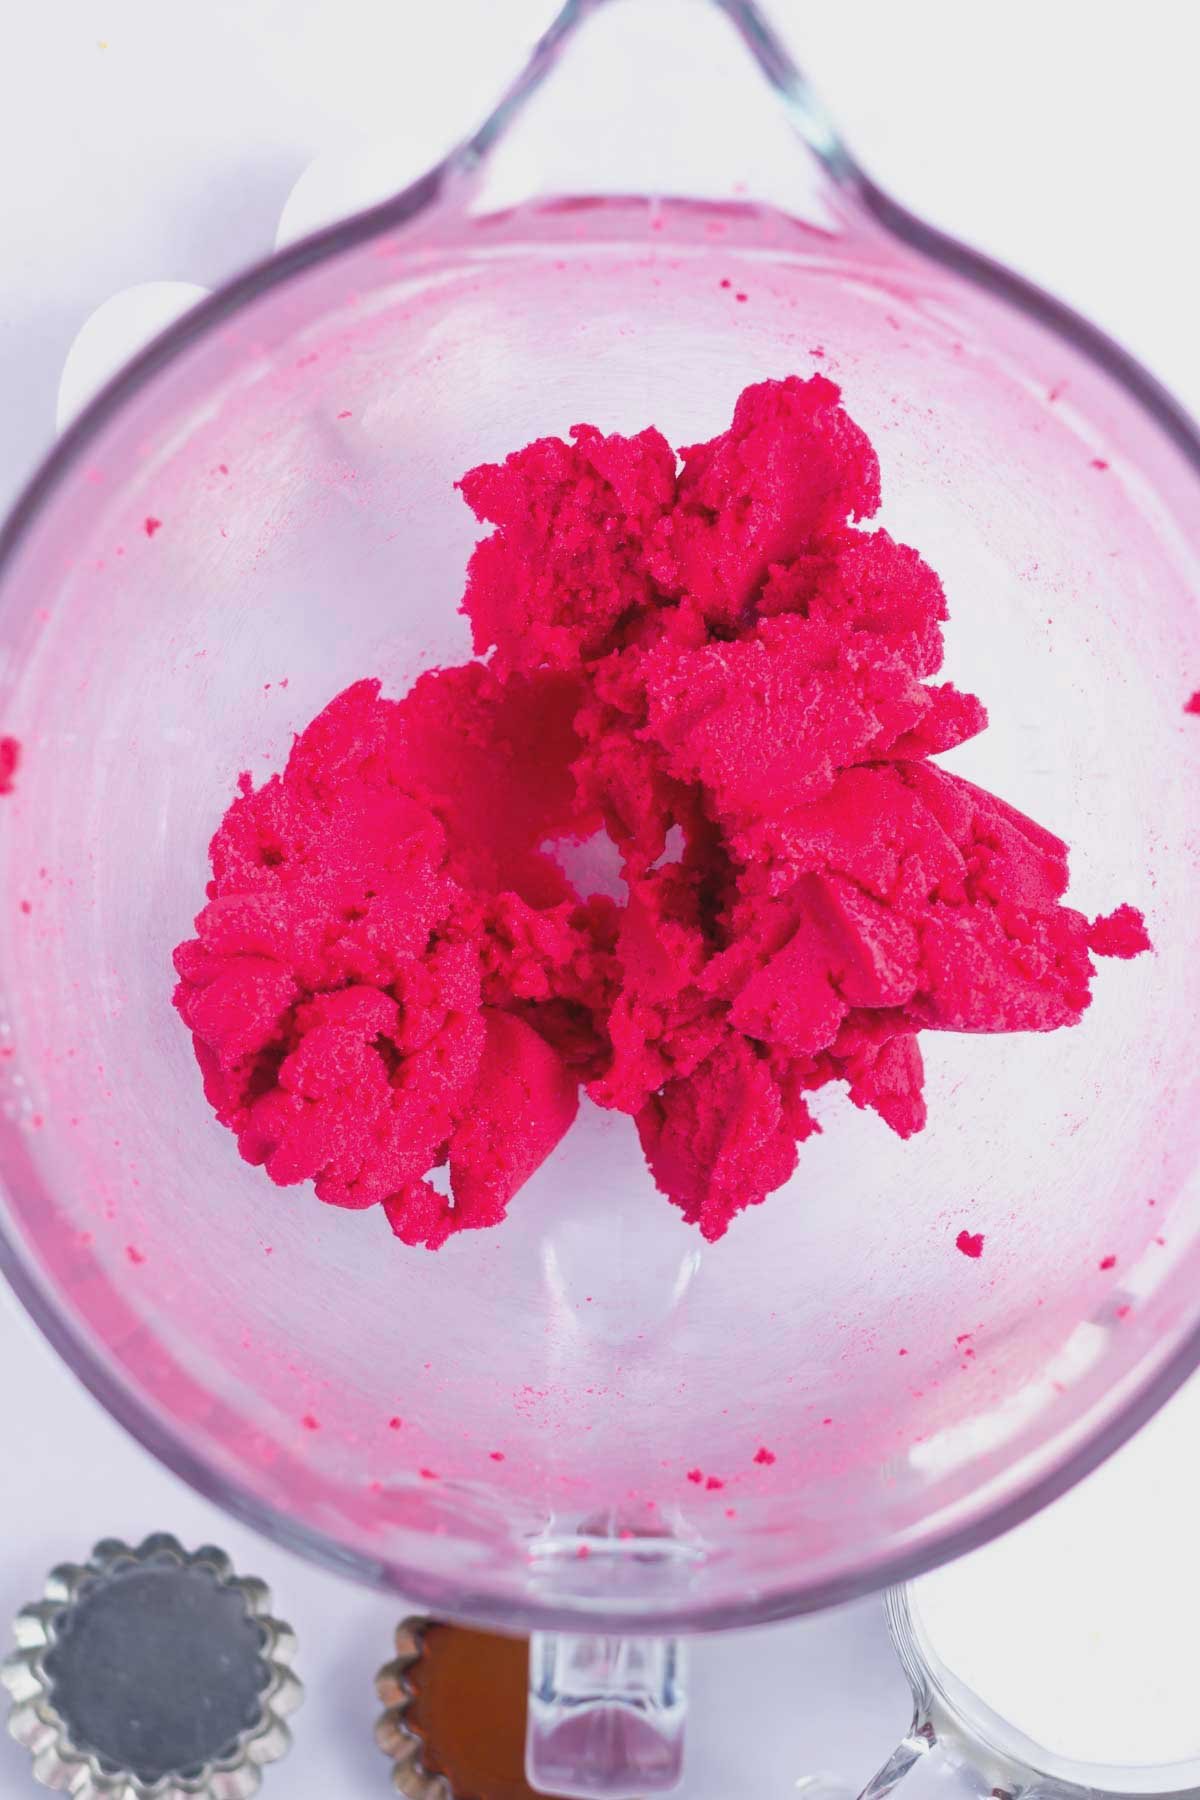 butter, pink food coloring and sugar beat together in a mixing bowl